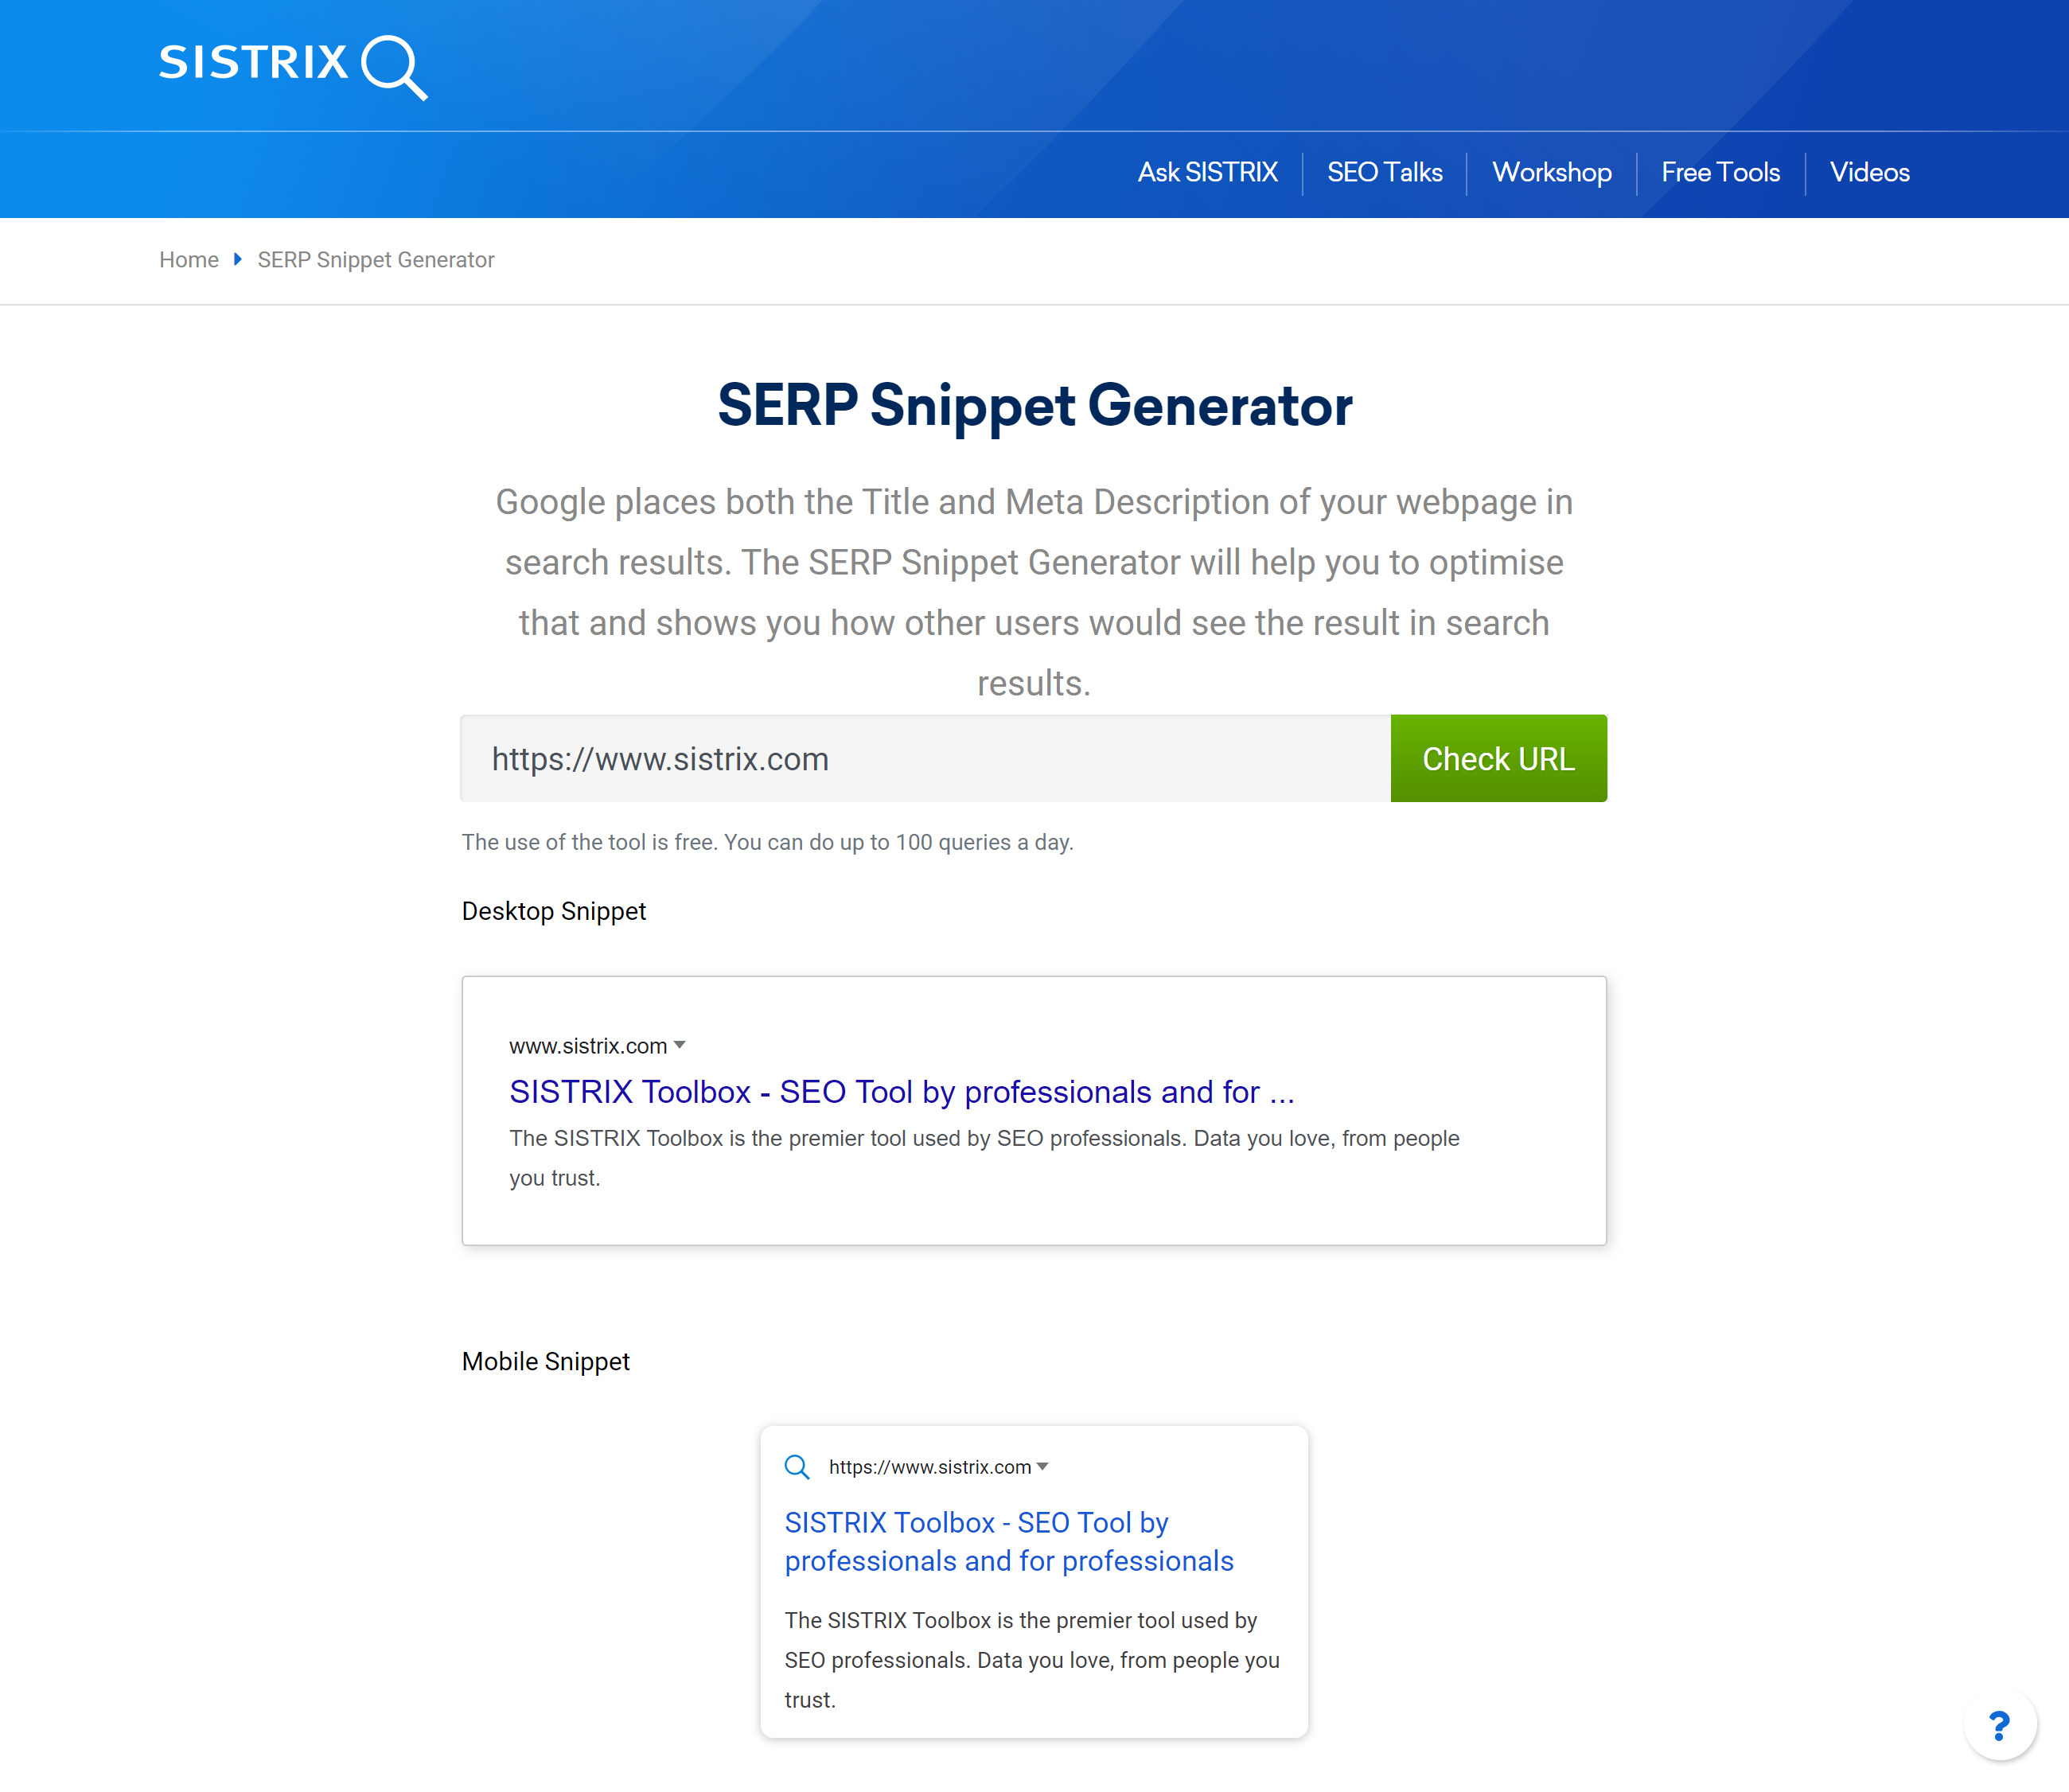 SERP Snippet Generator page image